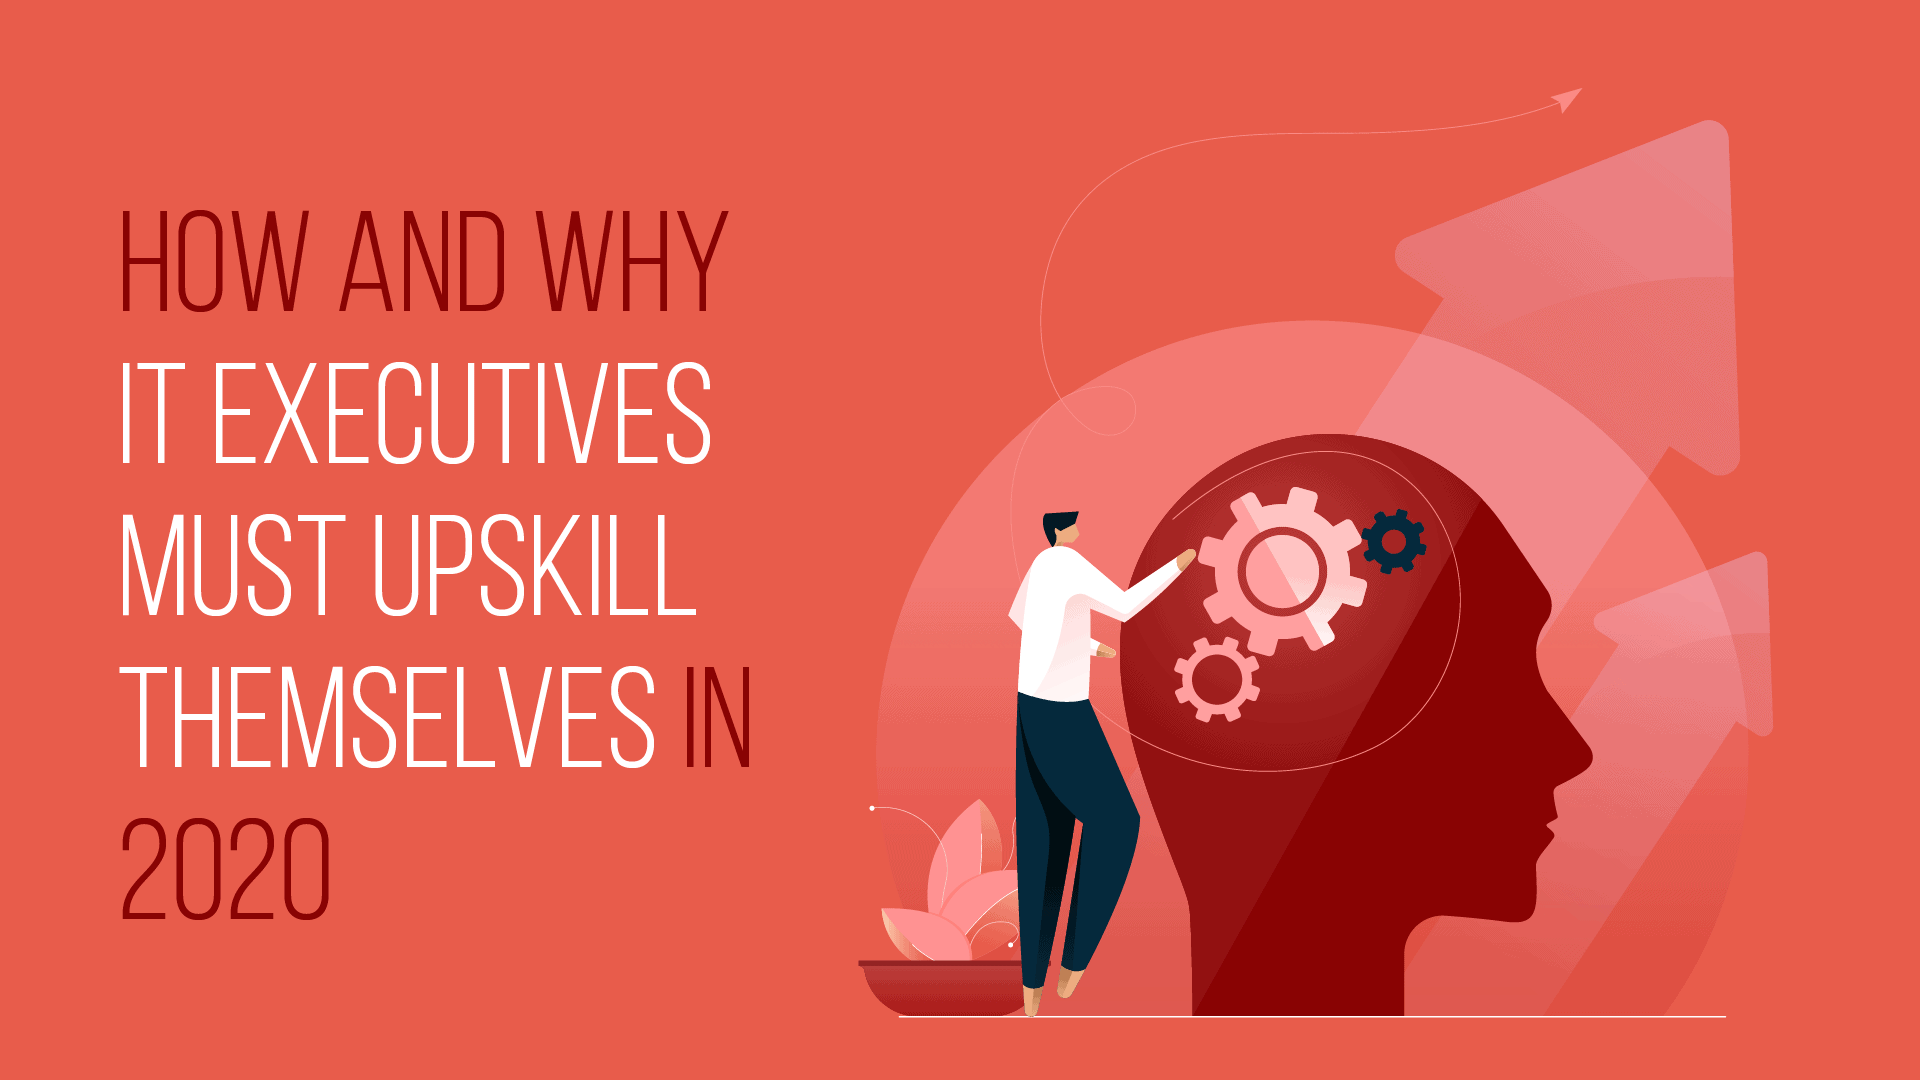 Importance of upskilling for IT executives